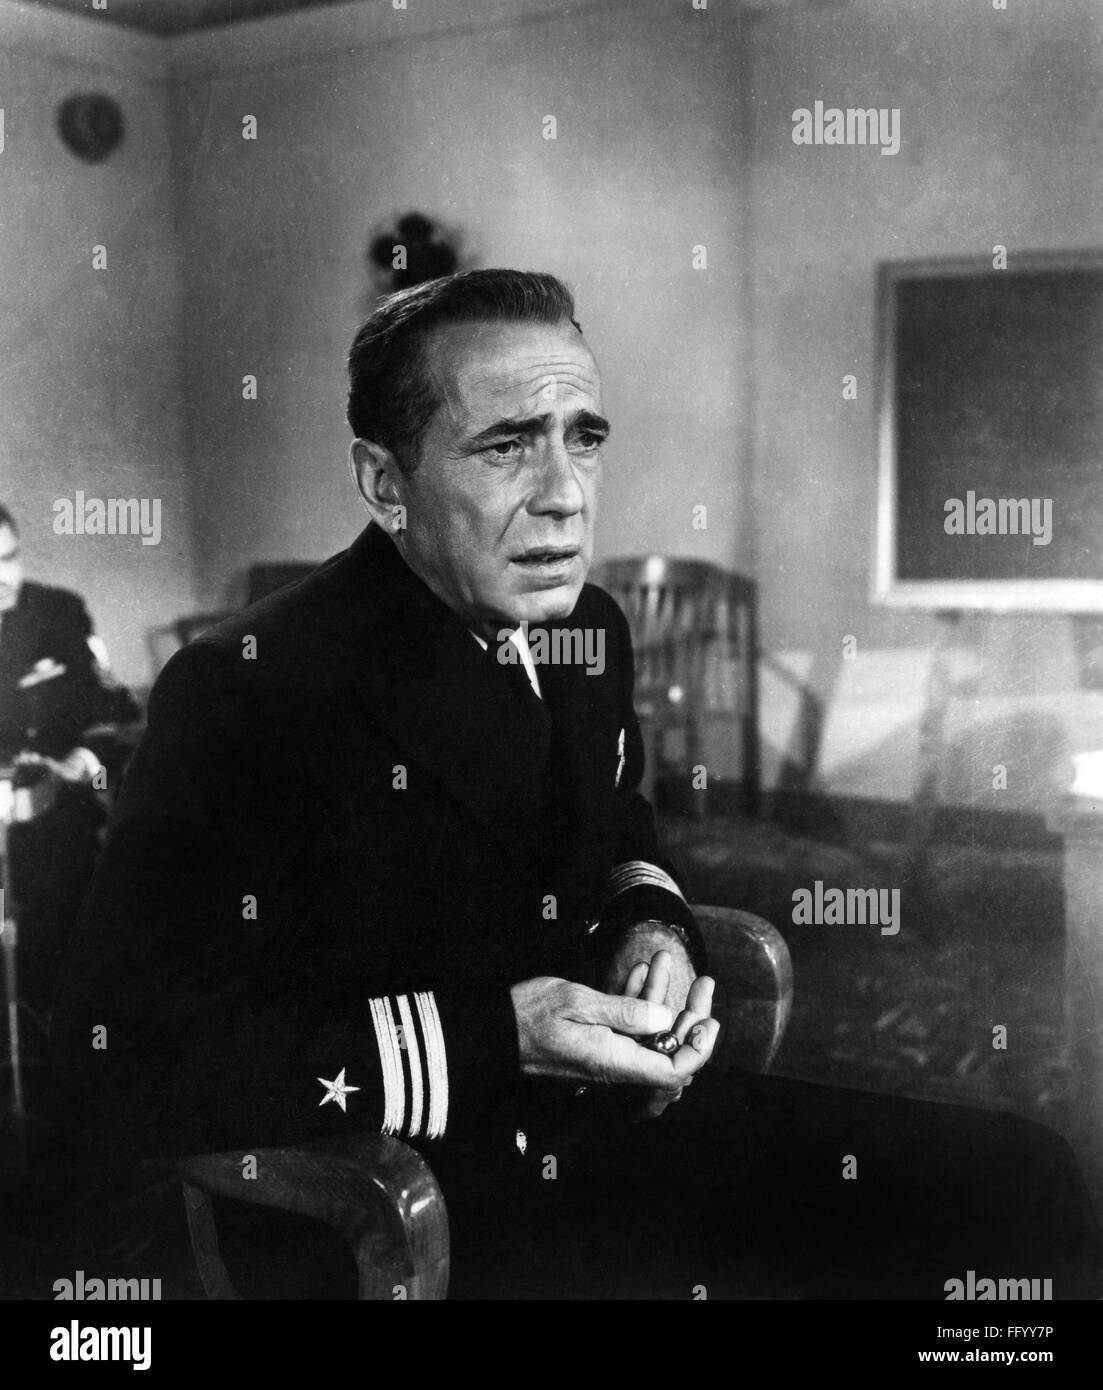 THE CAINE MUTINY, 1954. /nHumphrey Bogart in 'The Caine Mutiny,' directed by Edward Dmytryk, 1954. Stock Photo